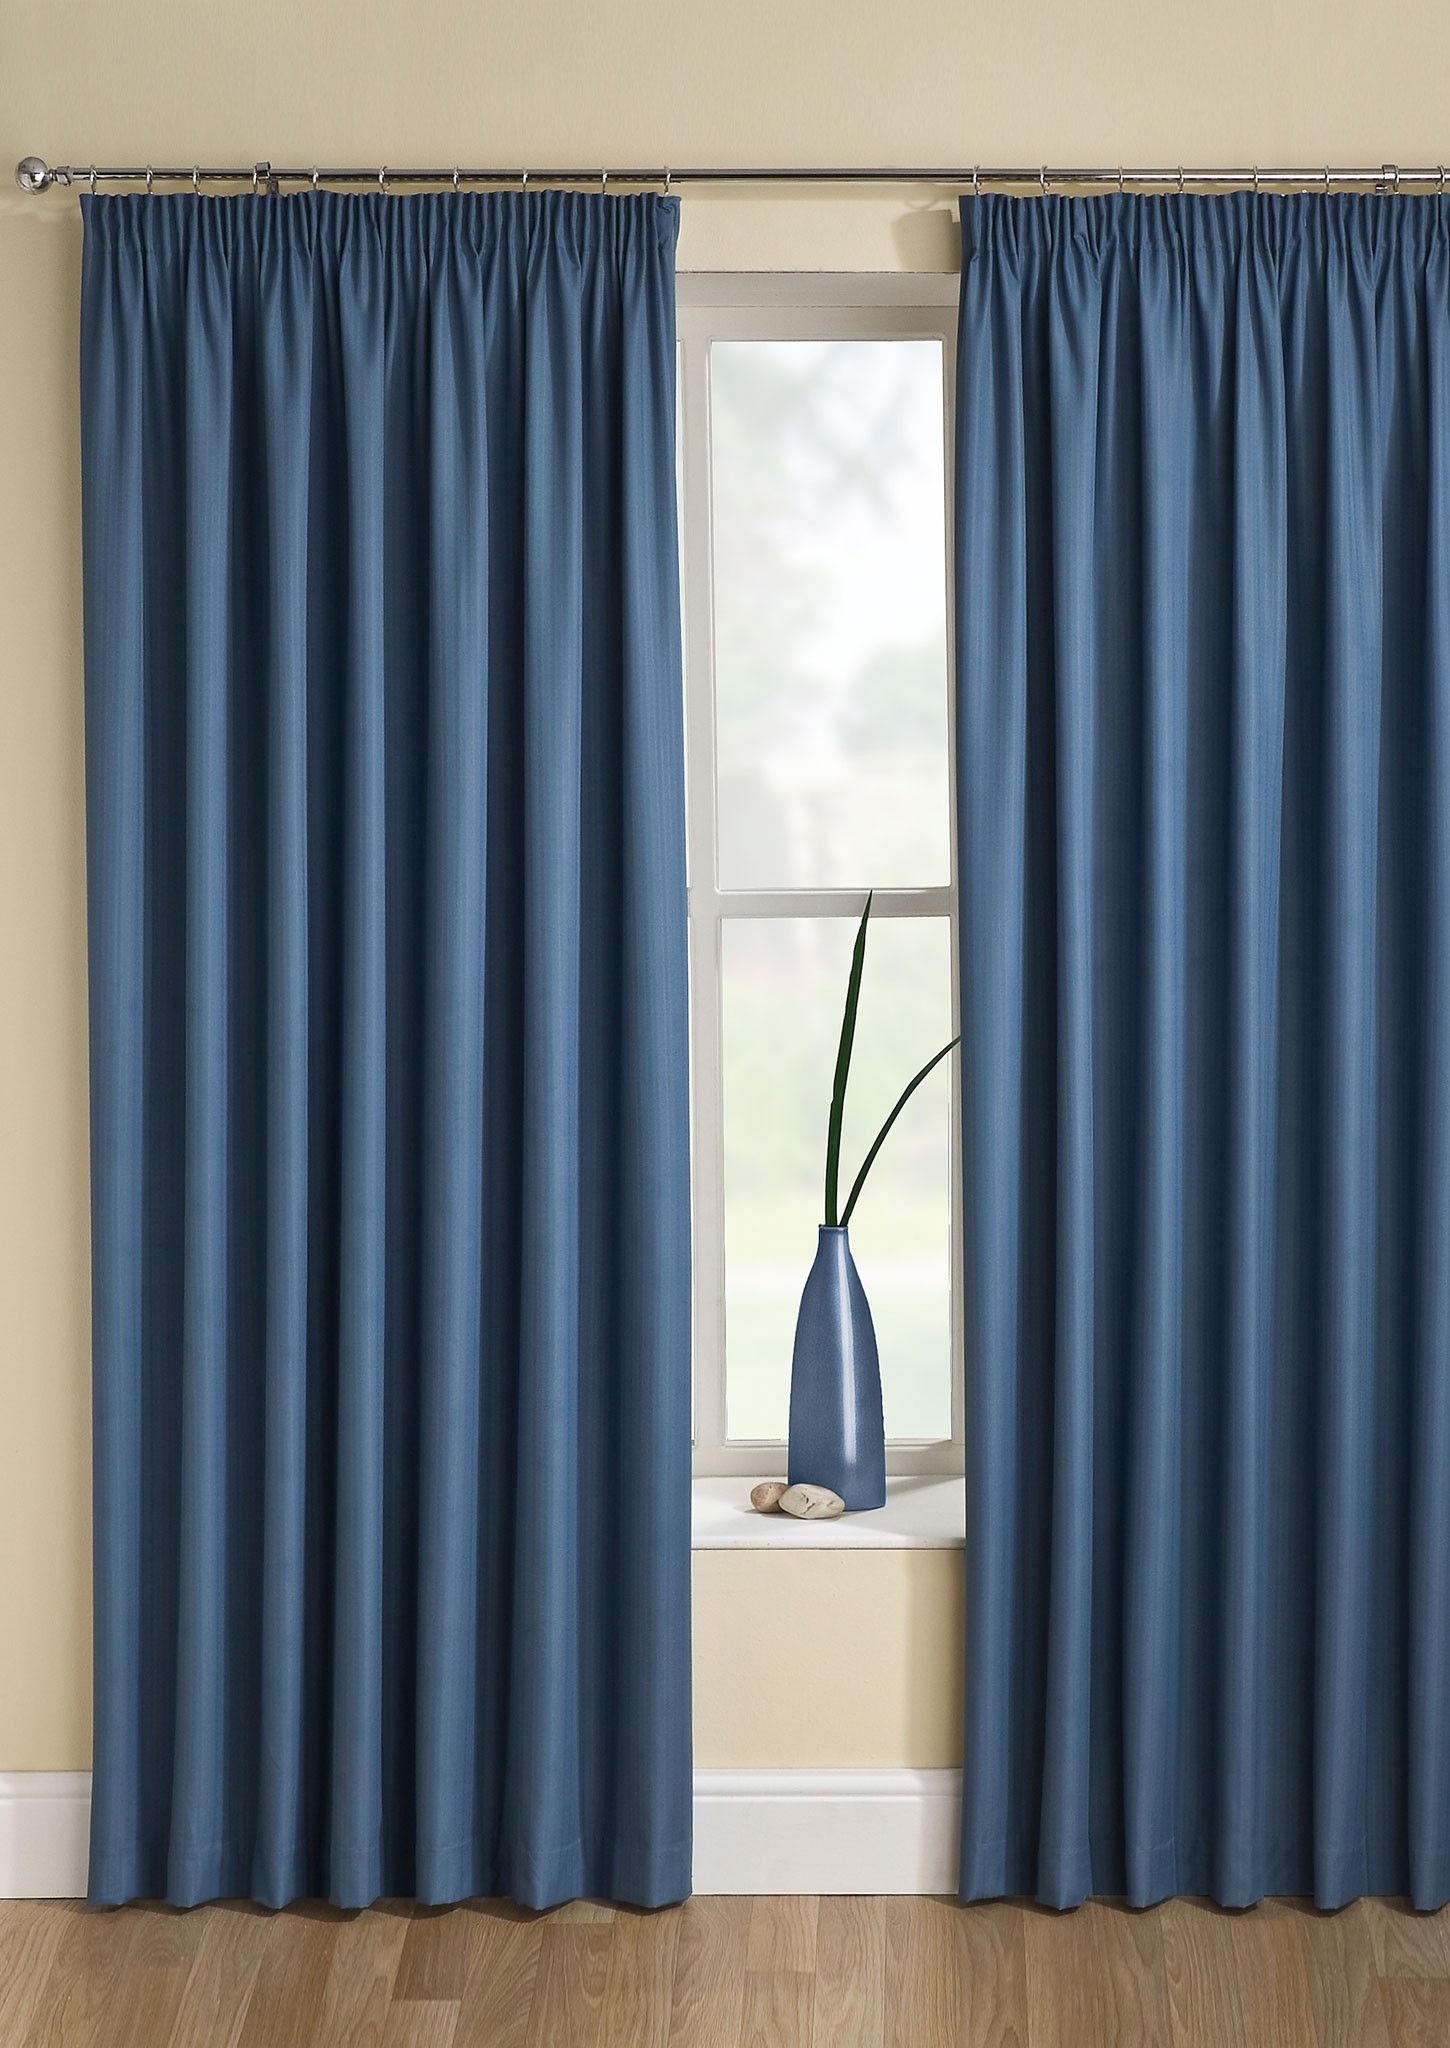 Tranquility Wedgewood Thermal Jacquard Pencil Pleat For Cyrus Thermal Blackout Back Tab Curtain Panels (View 12 of 20)